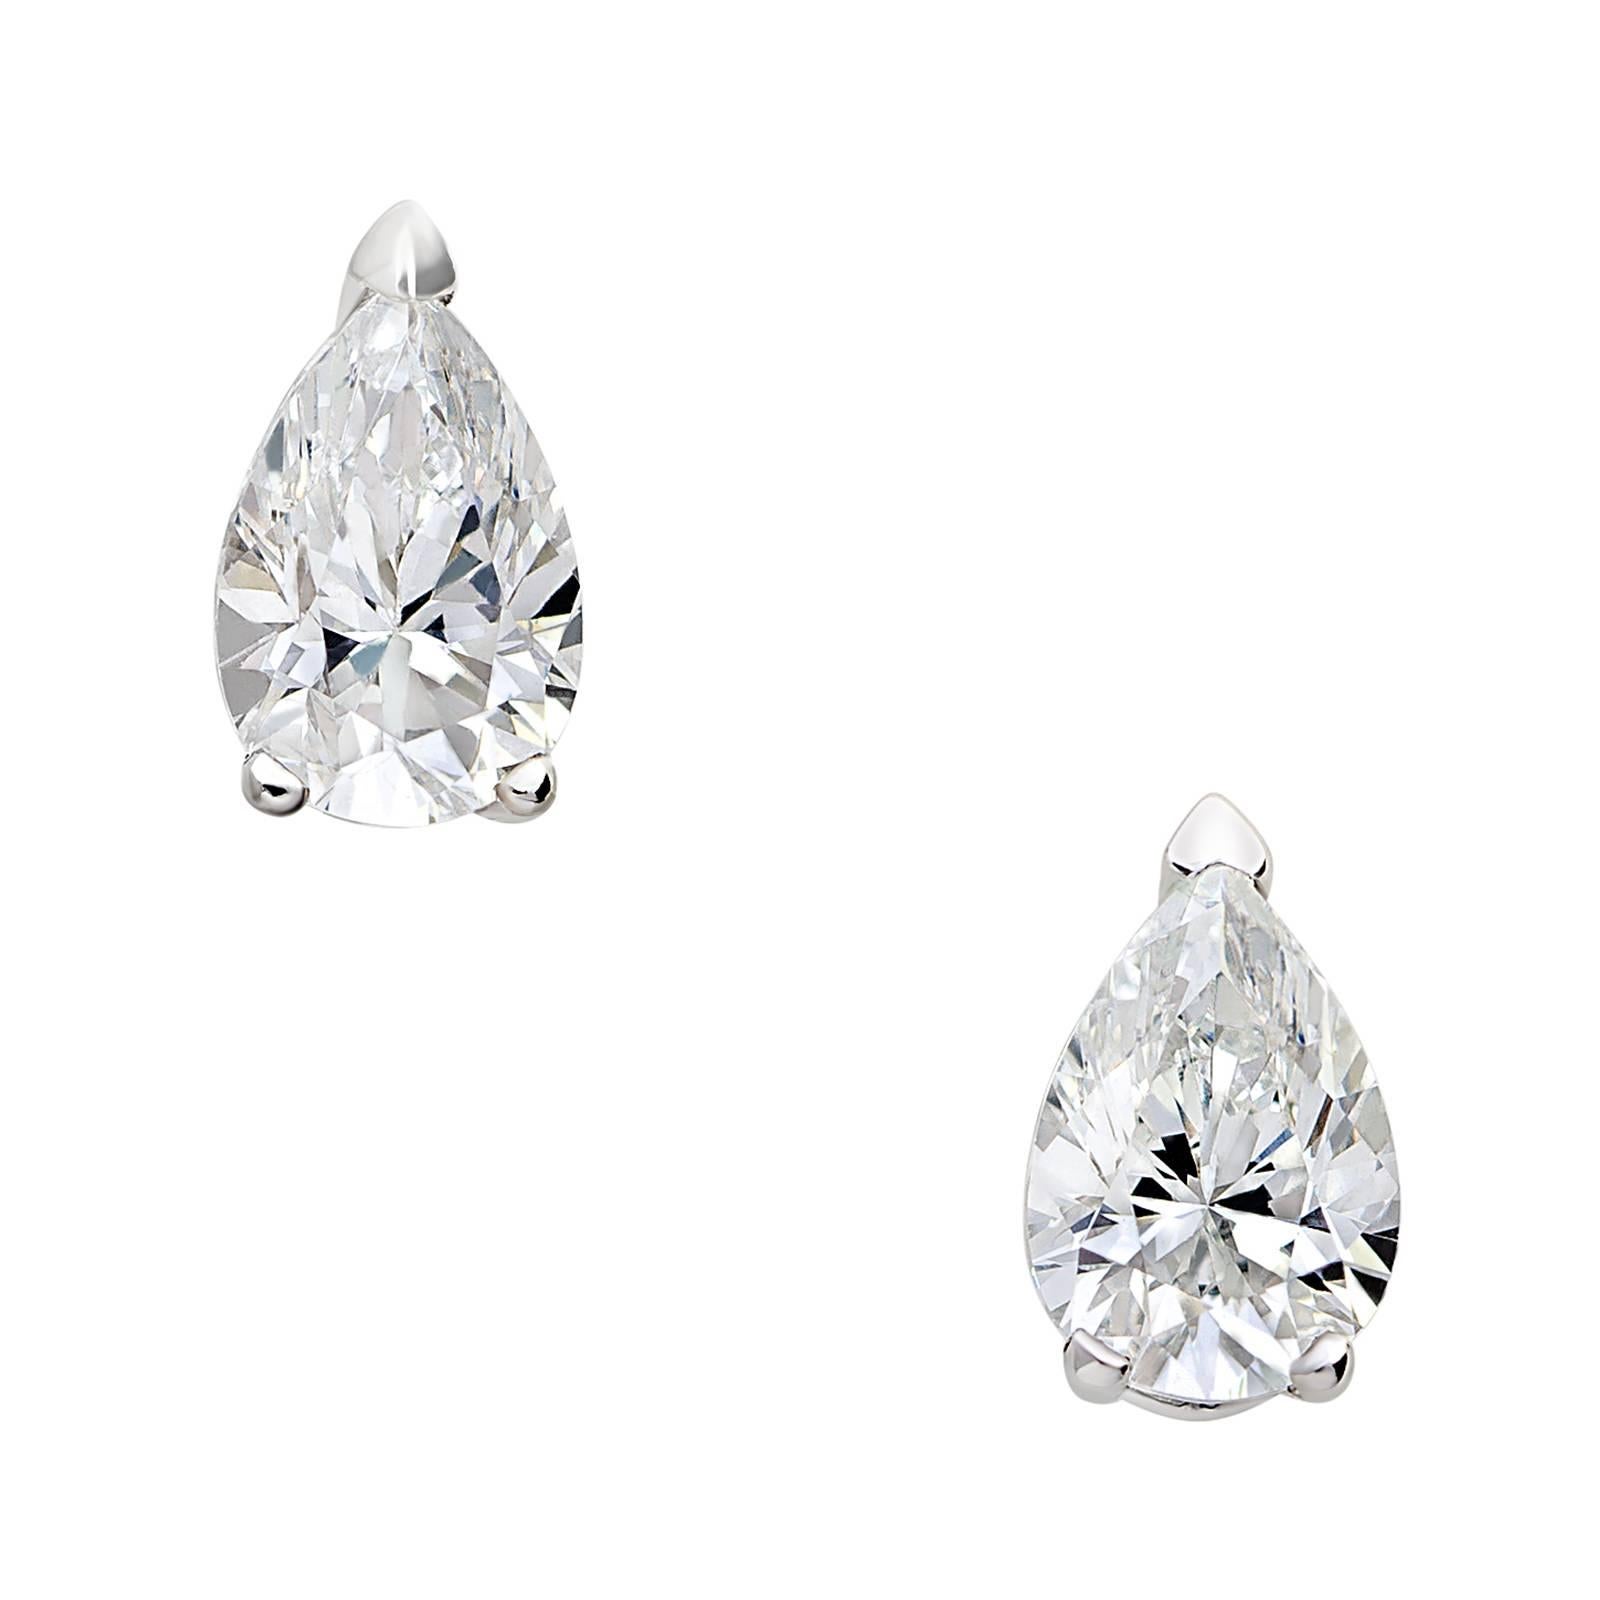 A small twist on a classic stud, the Pear Diamond Studs feature 0.53 tct natural pear shaped diamonds set in an 18k white gold backing. Each diamond is set in a signature House of Eléonore « fleur » setting.
